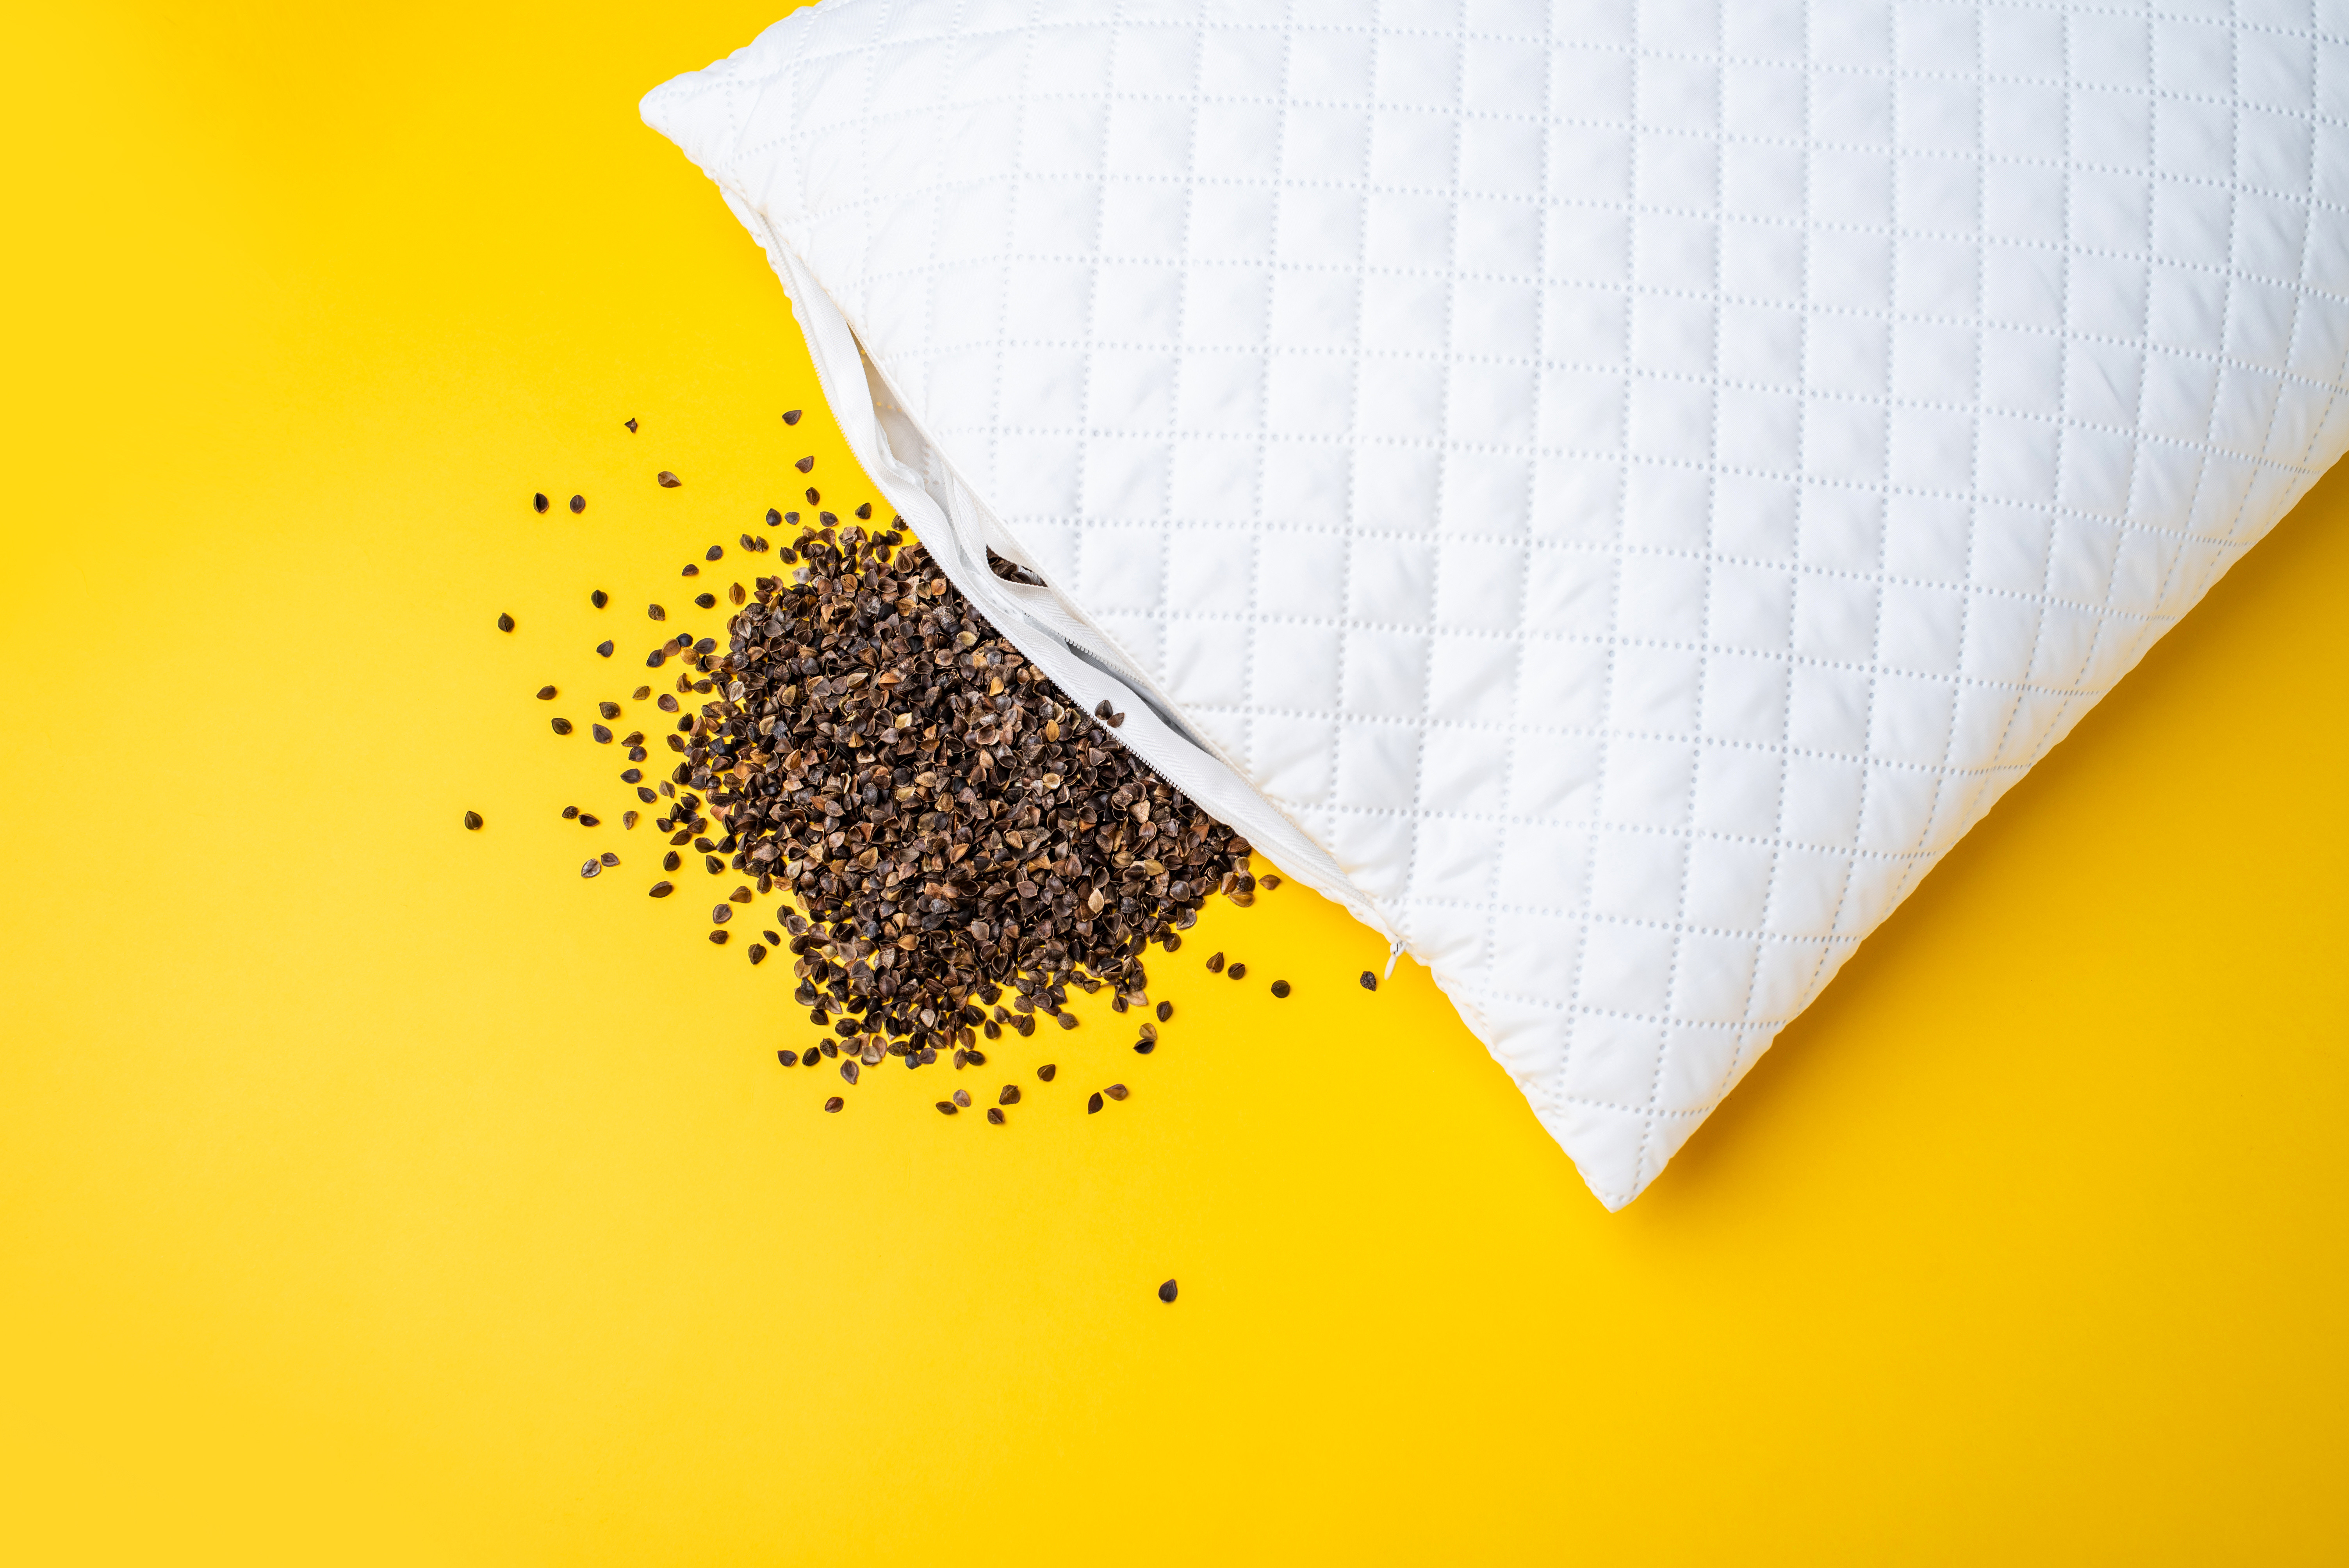 White pillow with buckwheat hulls spilling out against a yellow background